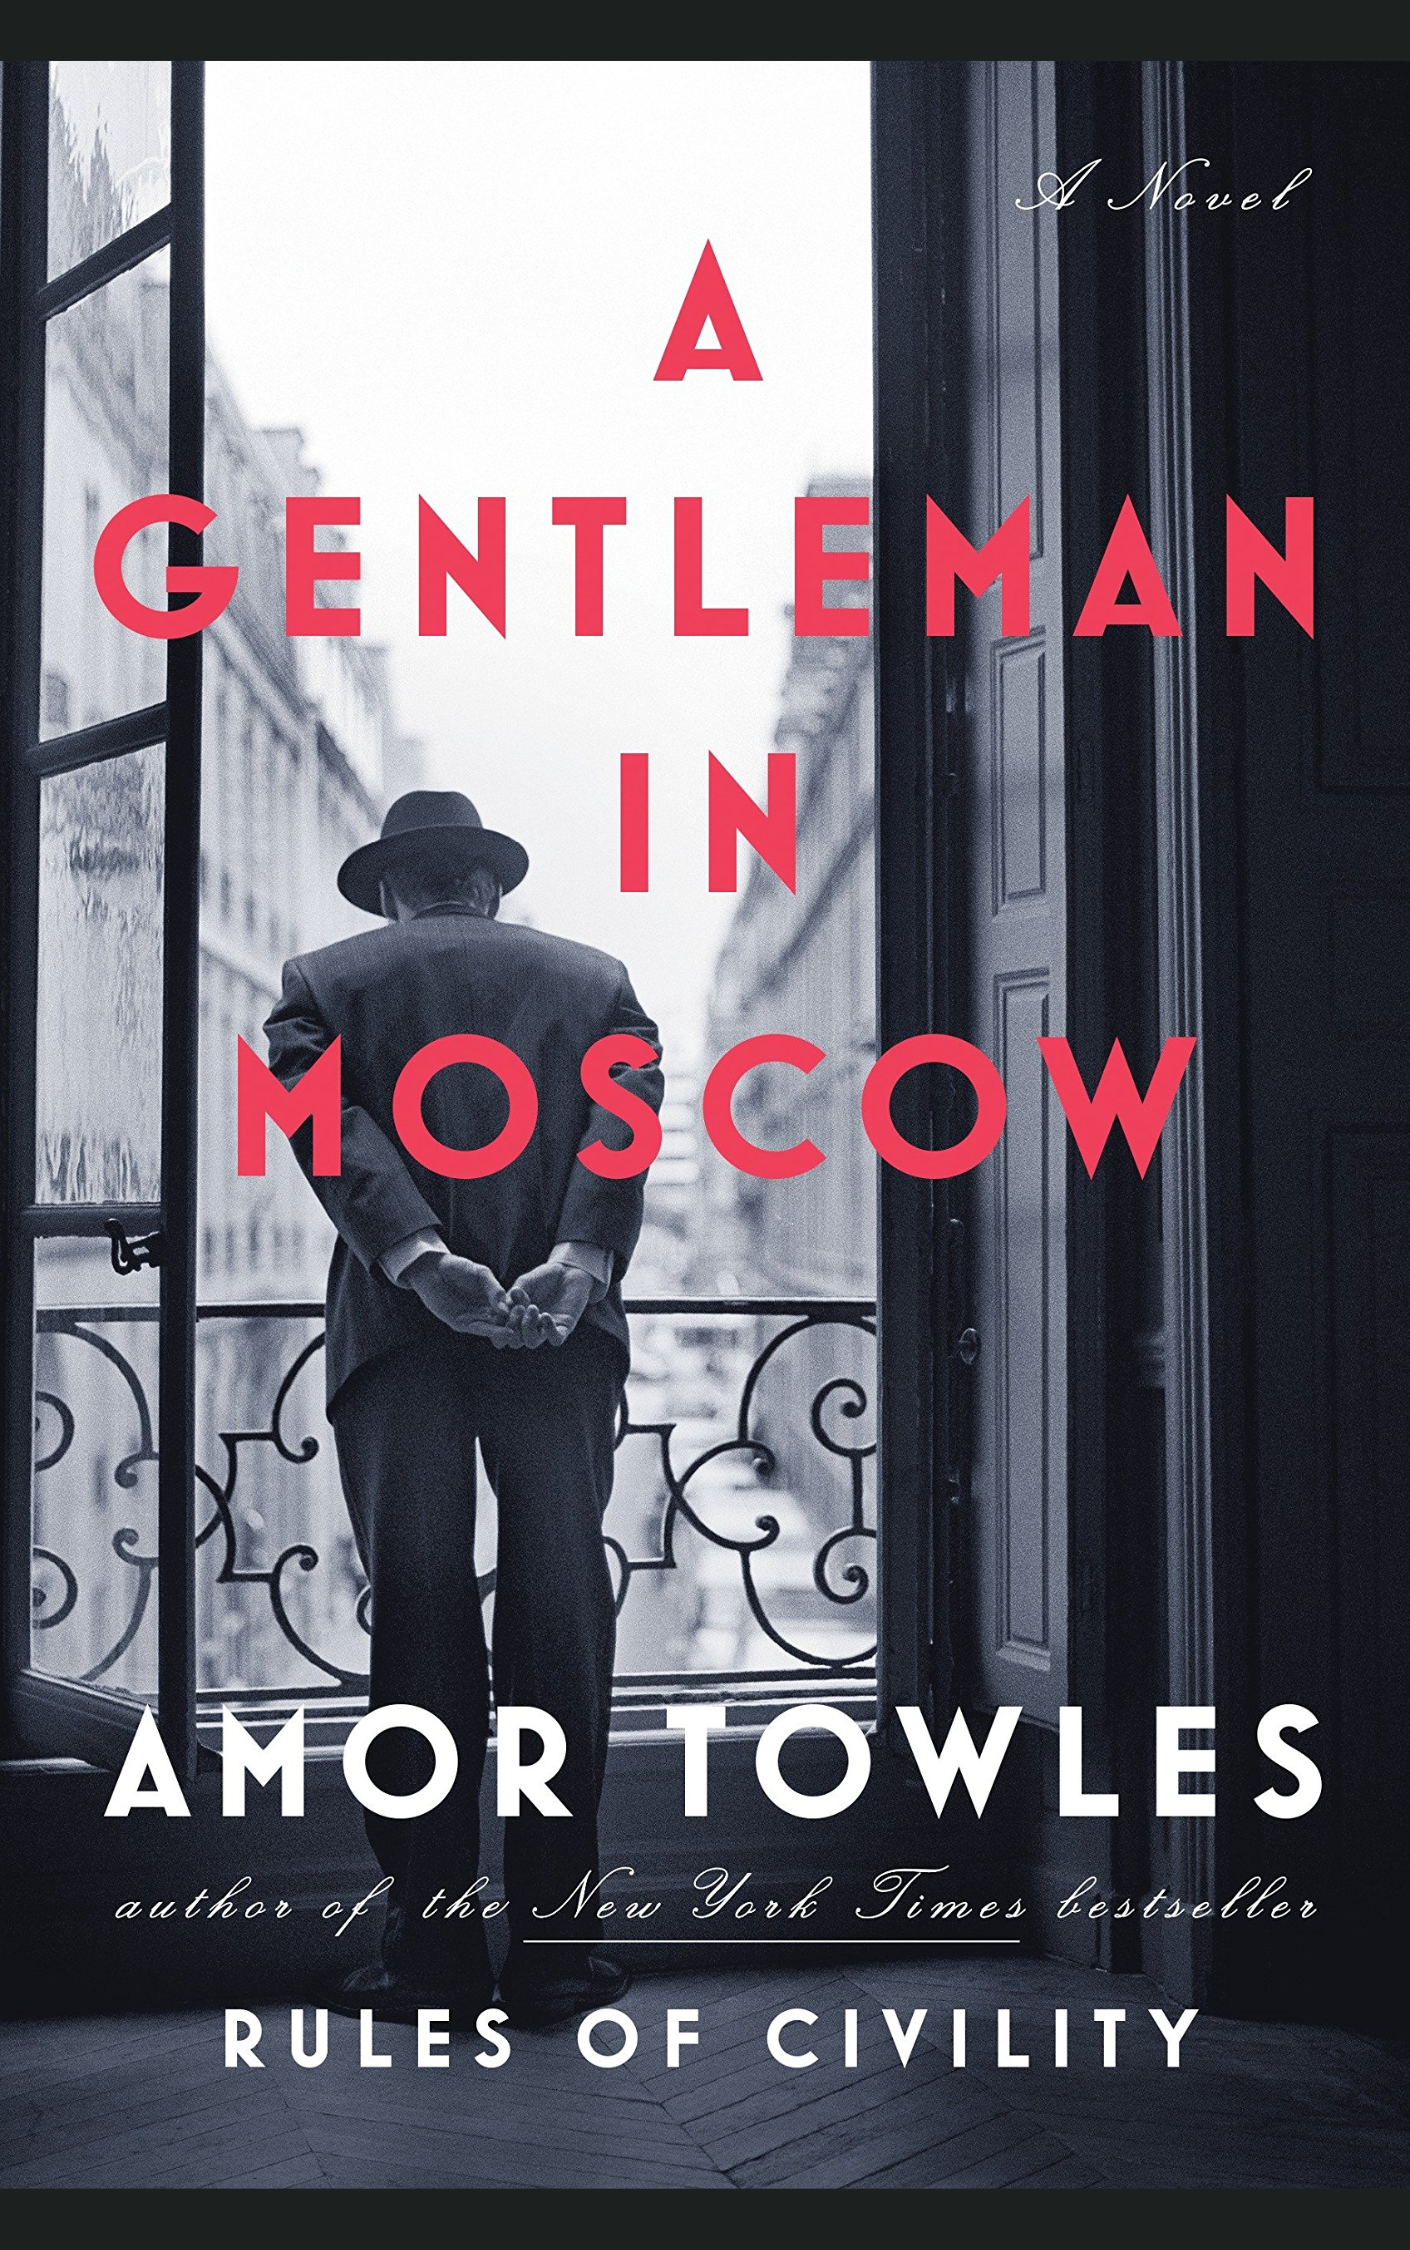 A GENTLEMAN IN MOSCOW by AMOR TOWLES